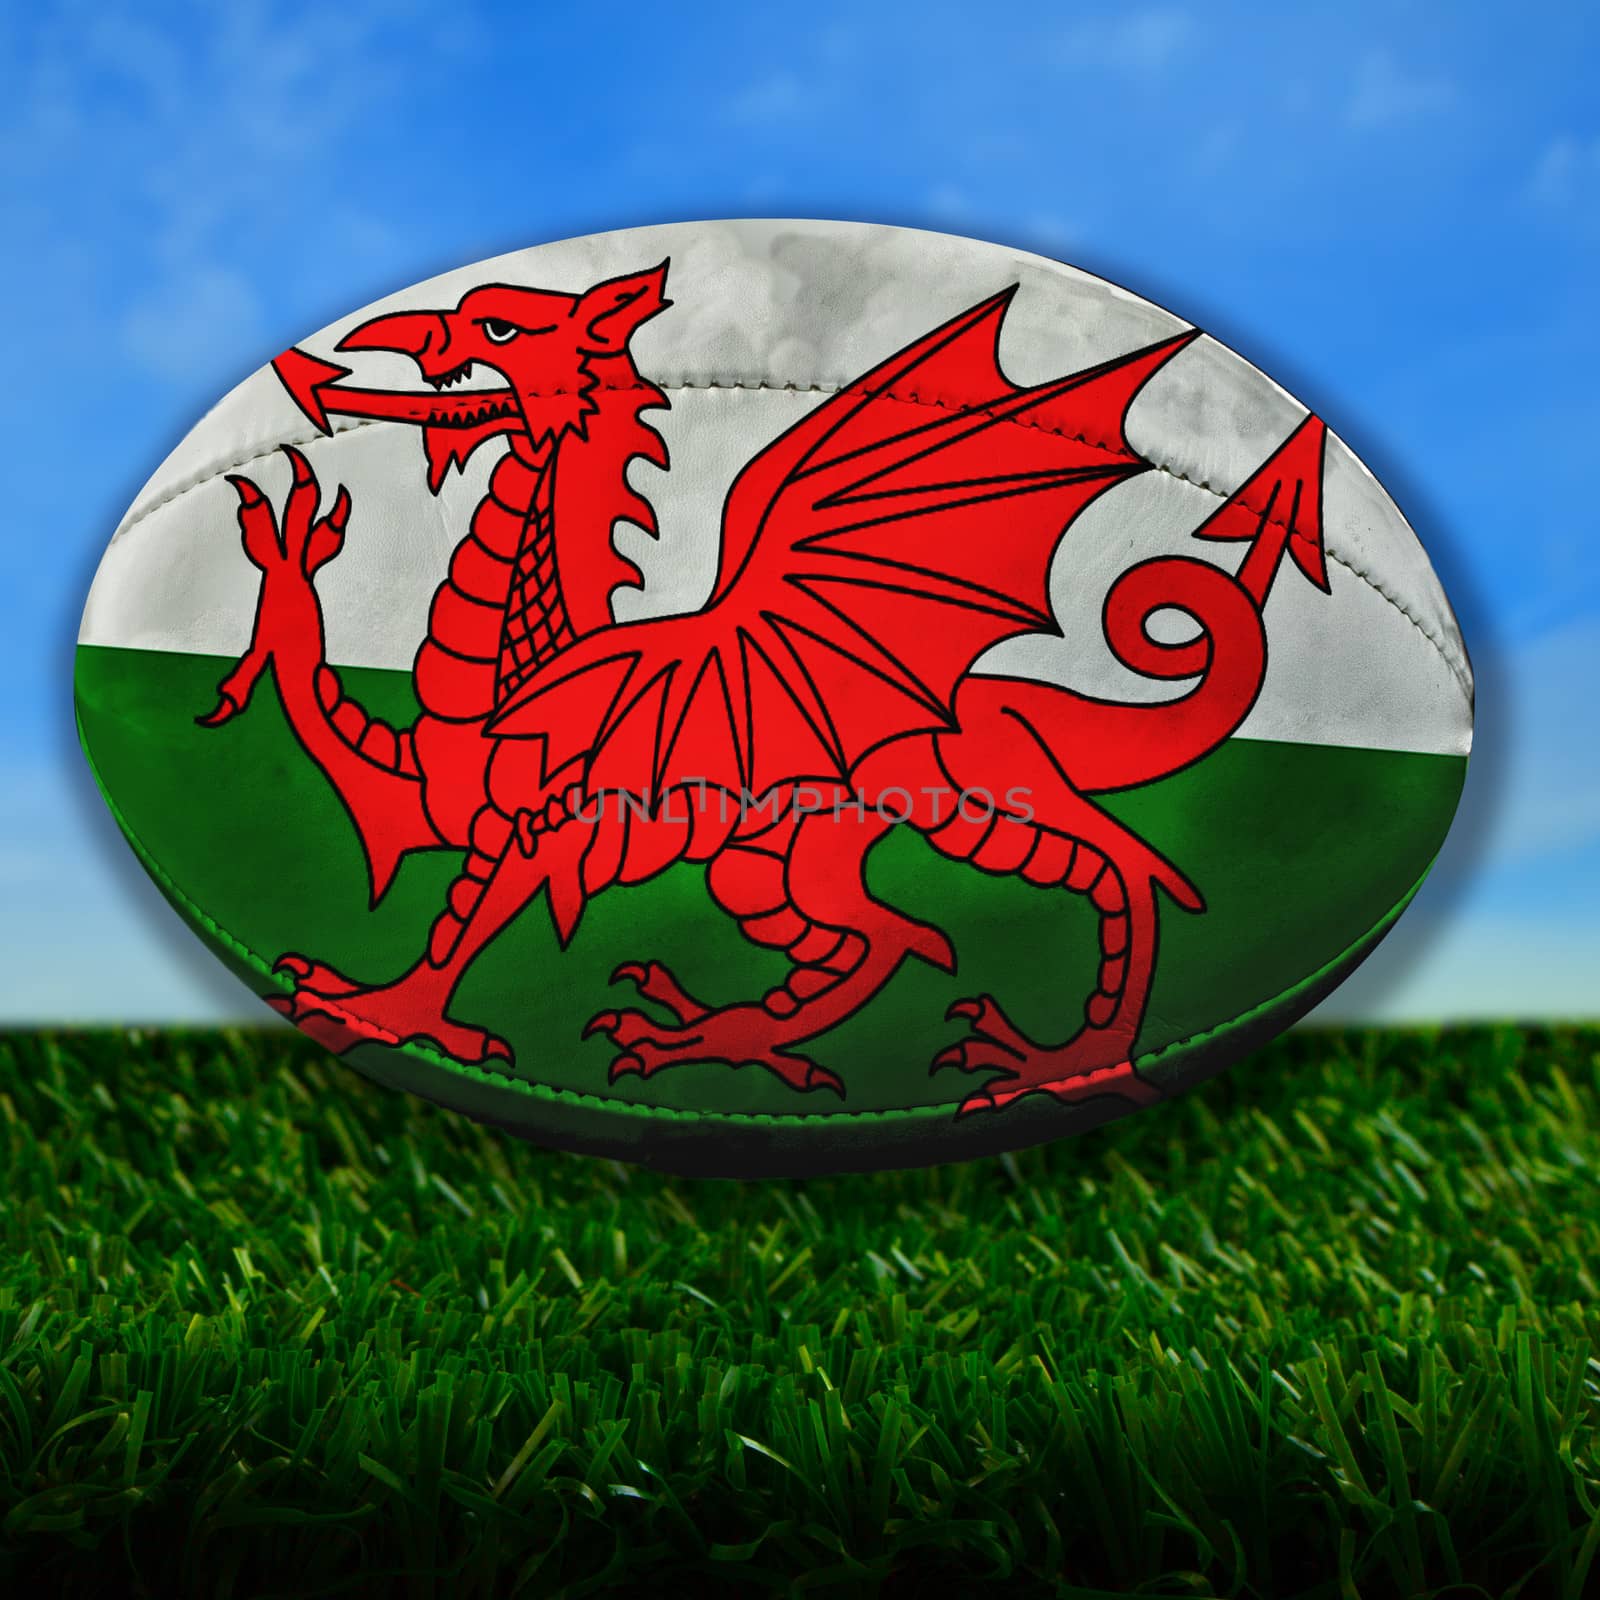 Wales Rugby by Koufax73